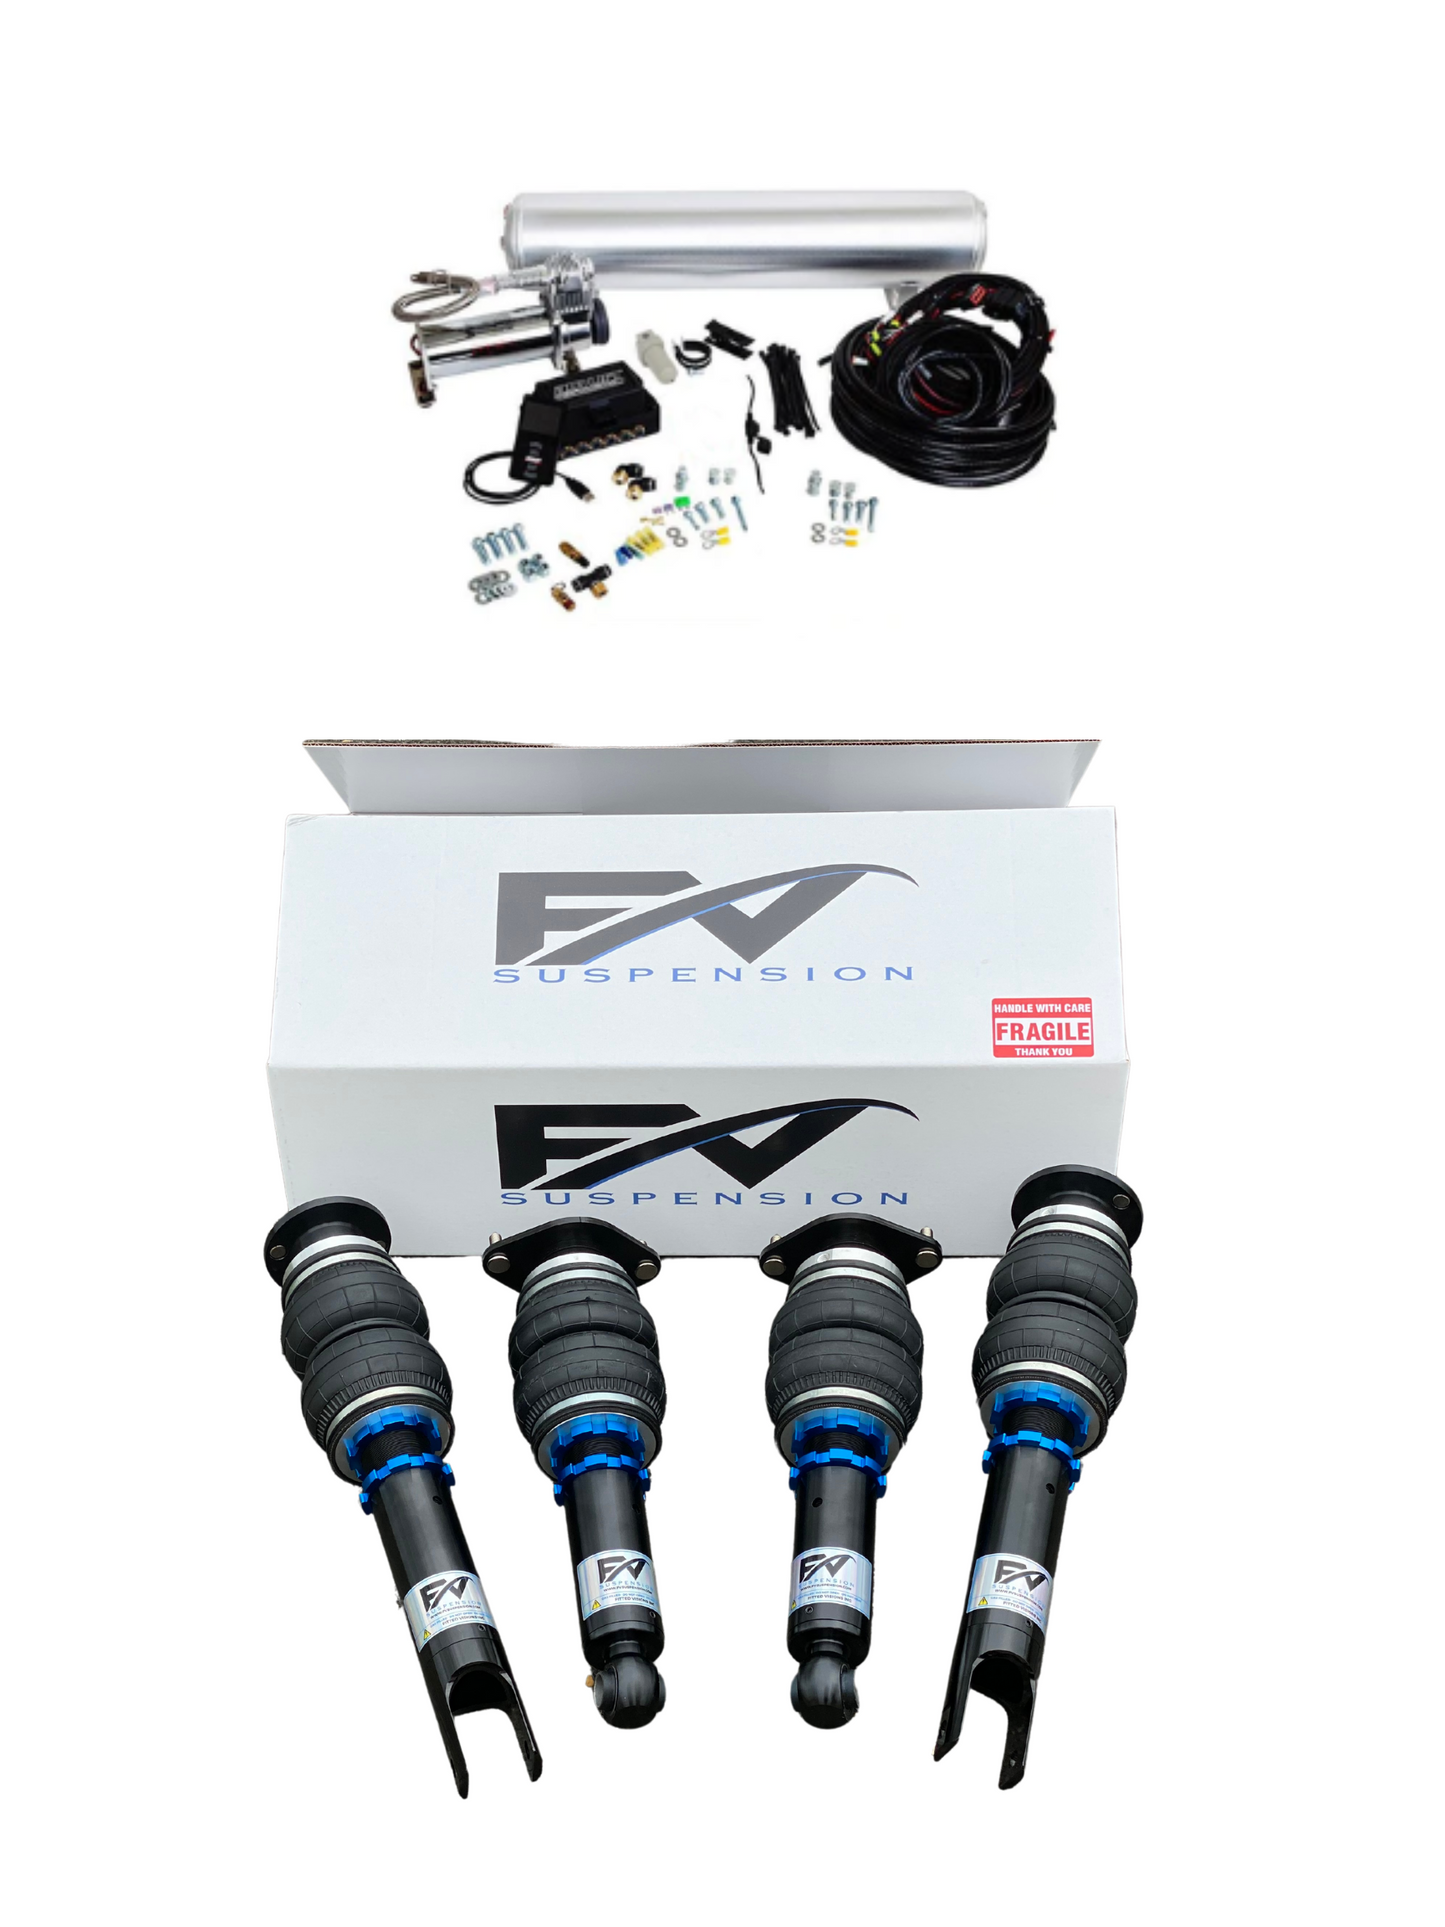 FV Suspension 3P Tier 2 Complete Air Ride kit for 03-07 Cadillac CTS - FVALtier2kit153